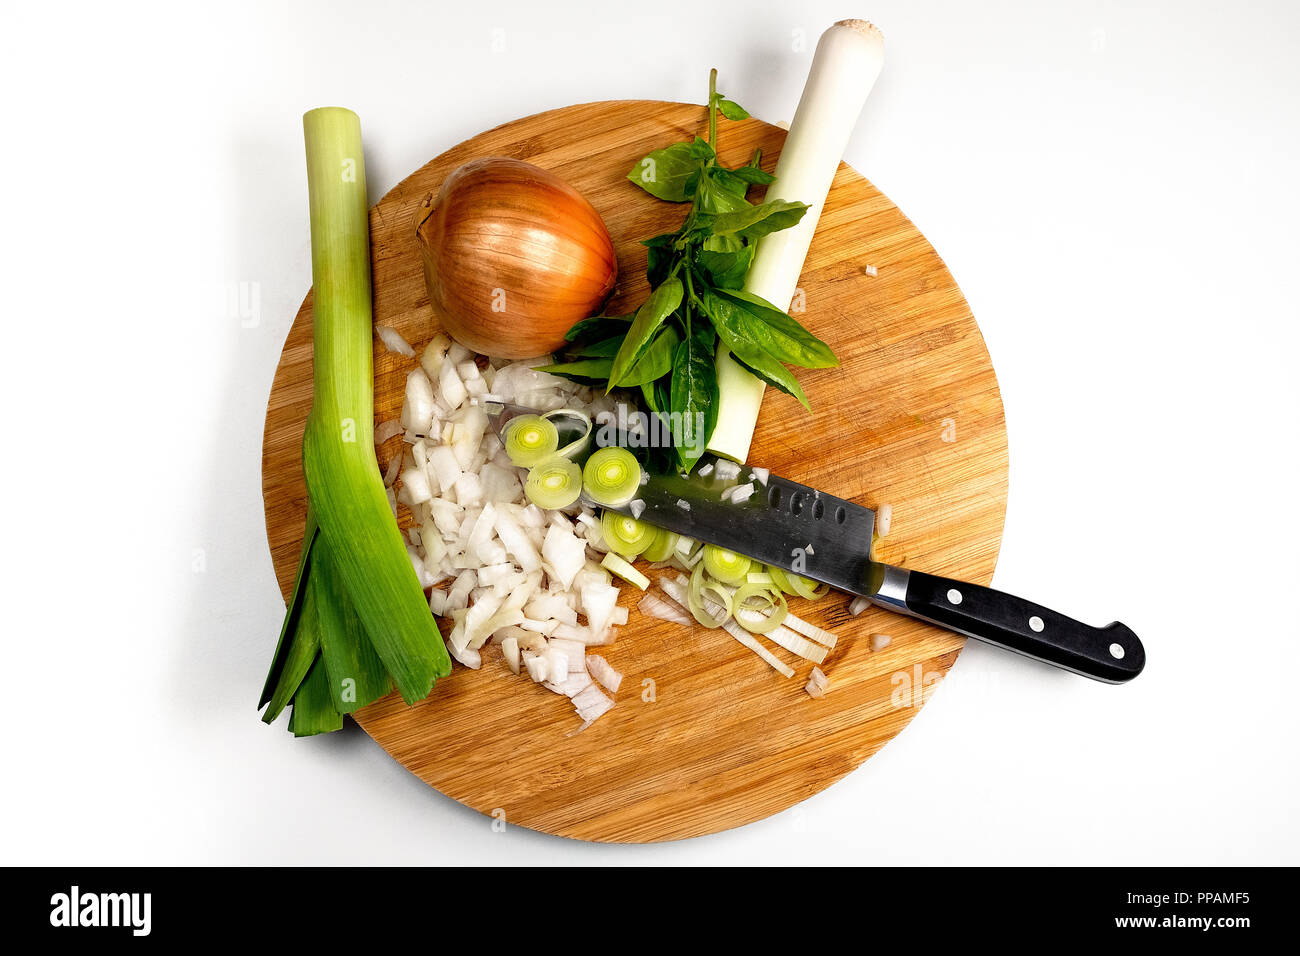 leek, onion and basil over a cutting board, during cooking time. Stock Photo